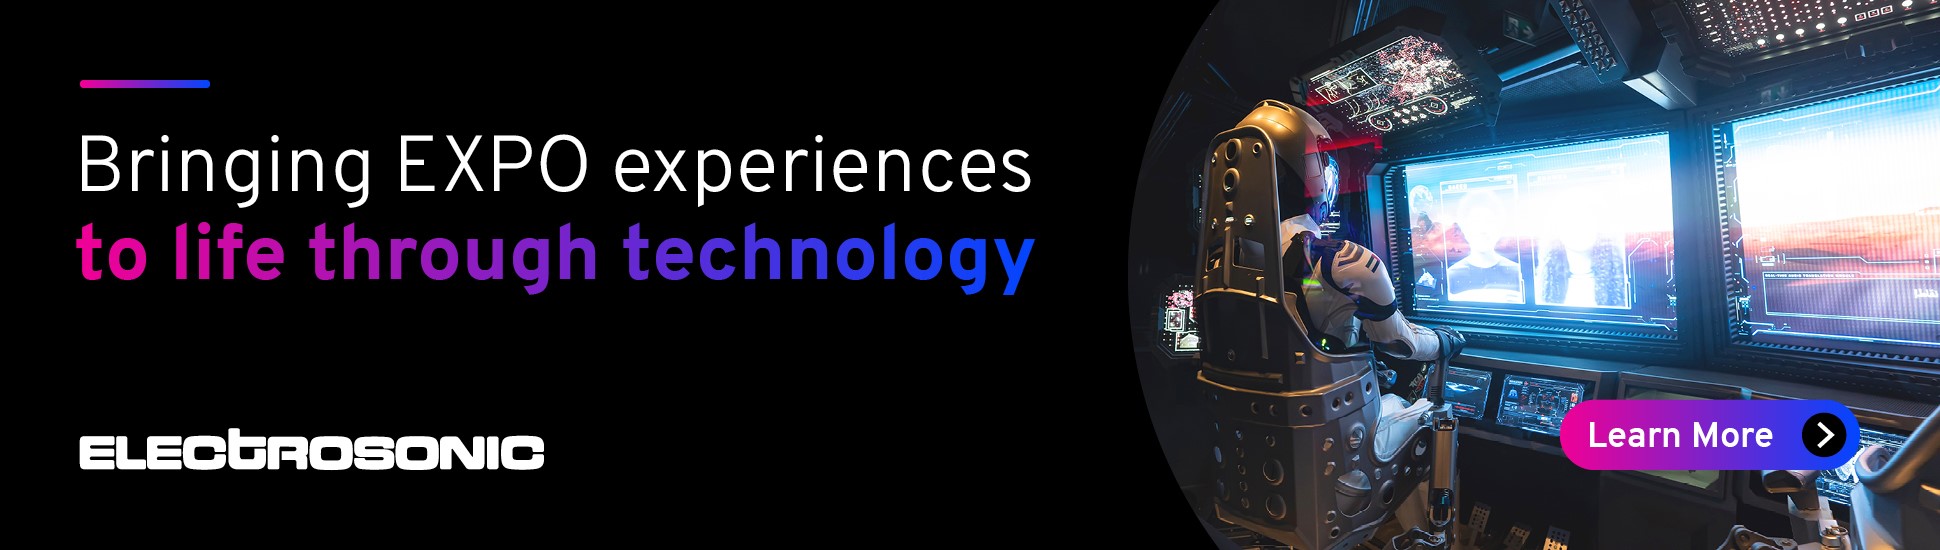 Bringing EXPO experiences to life through technology